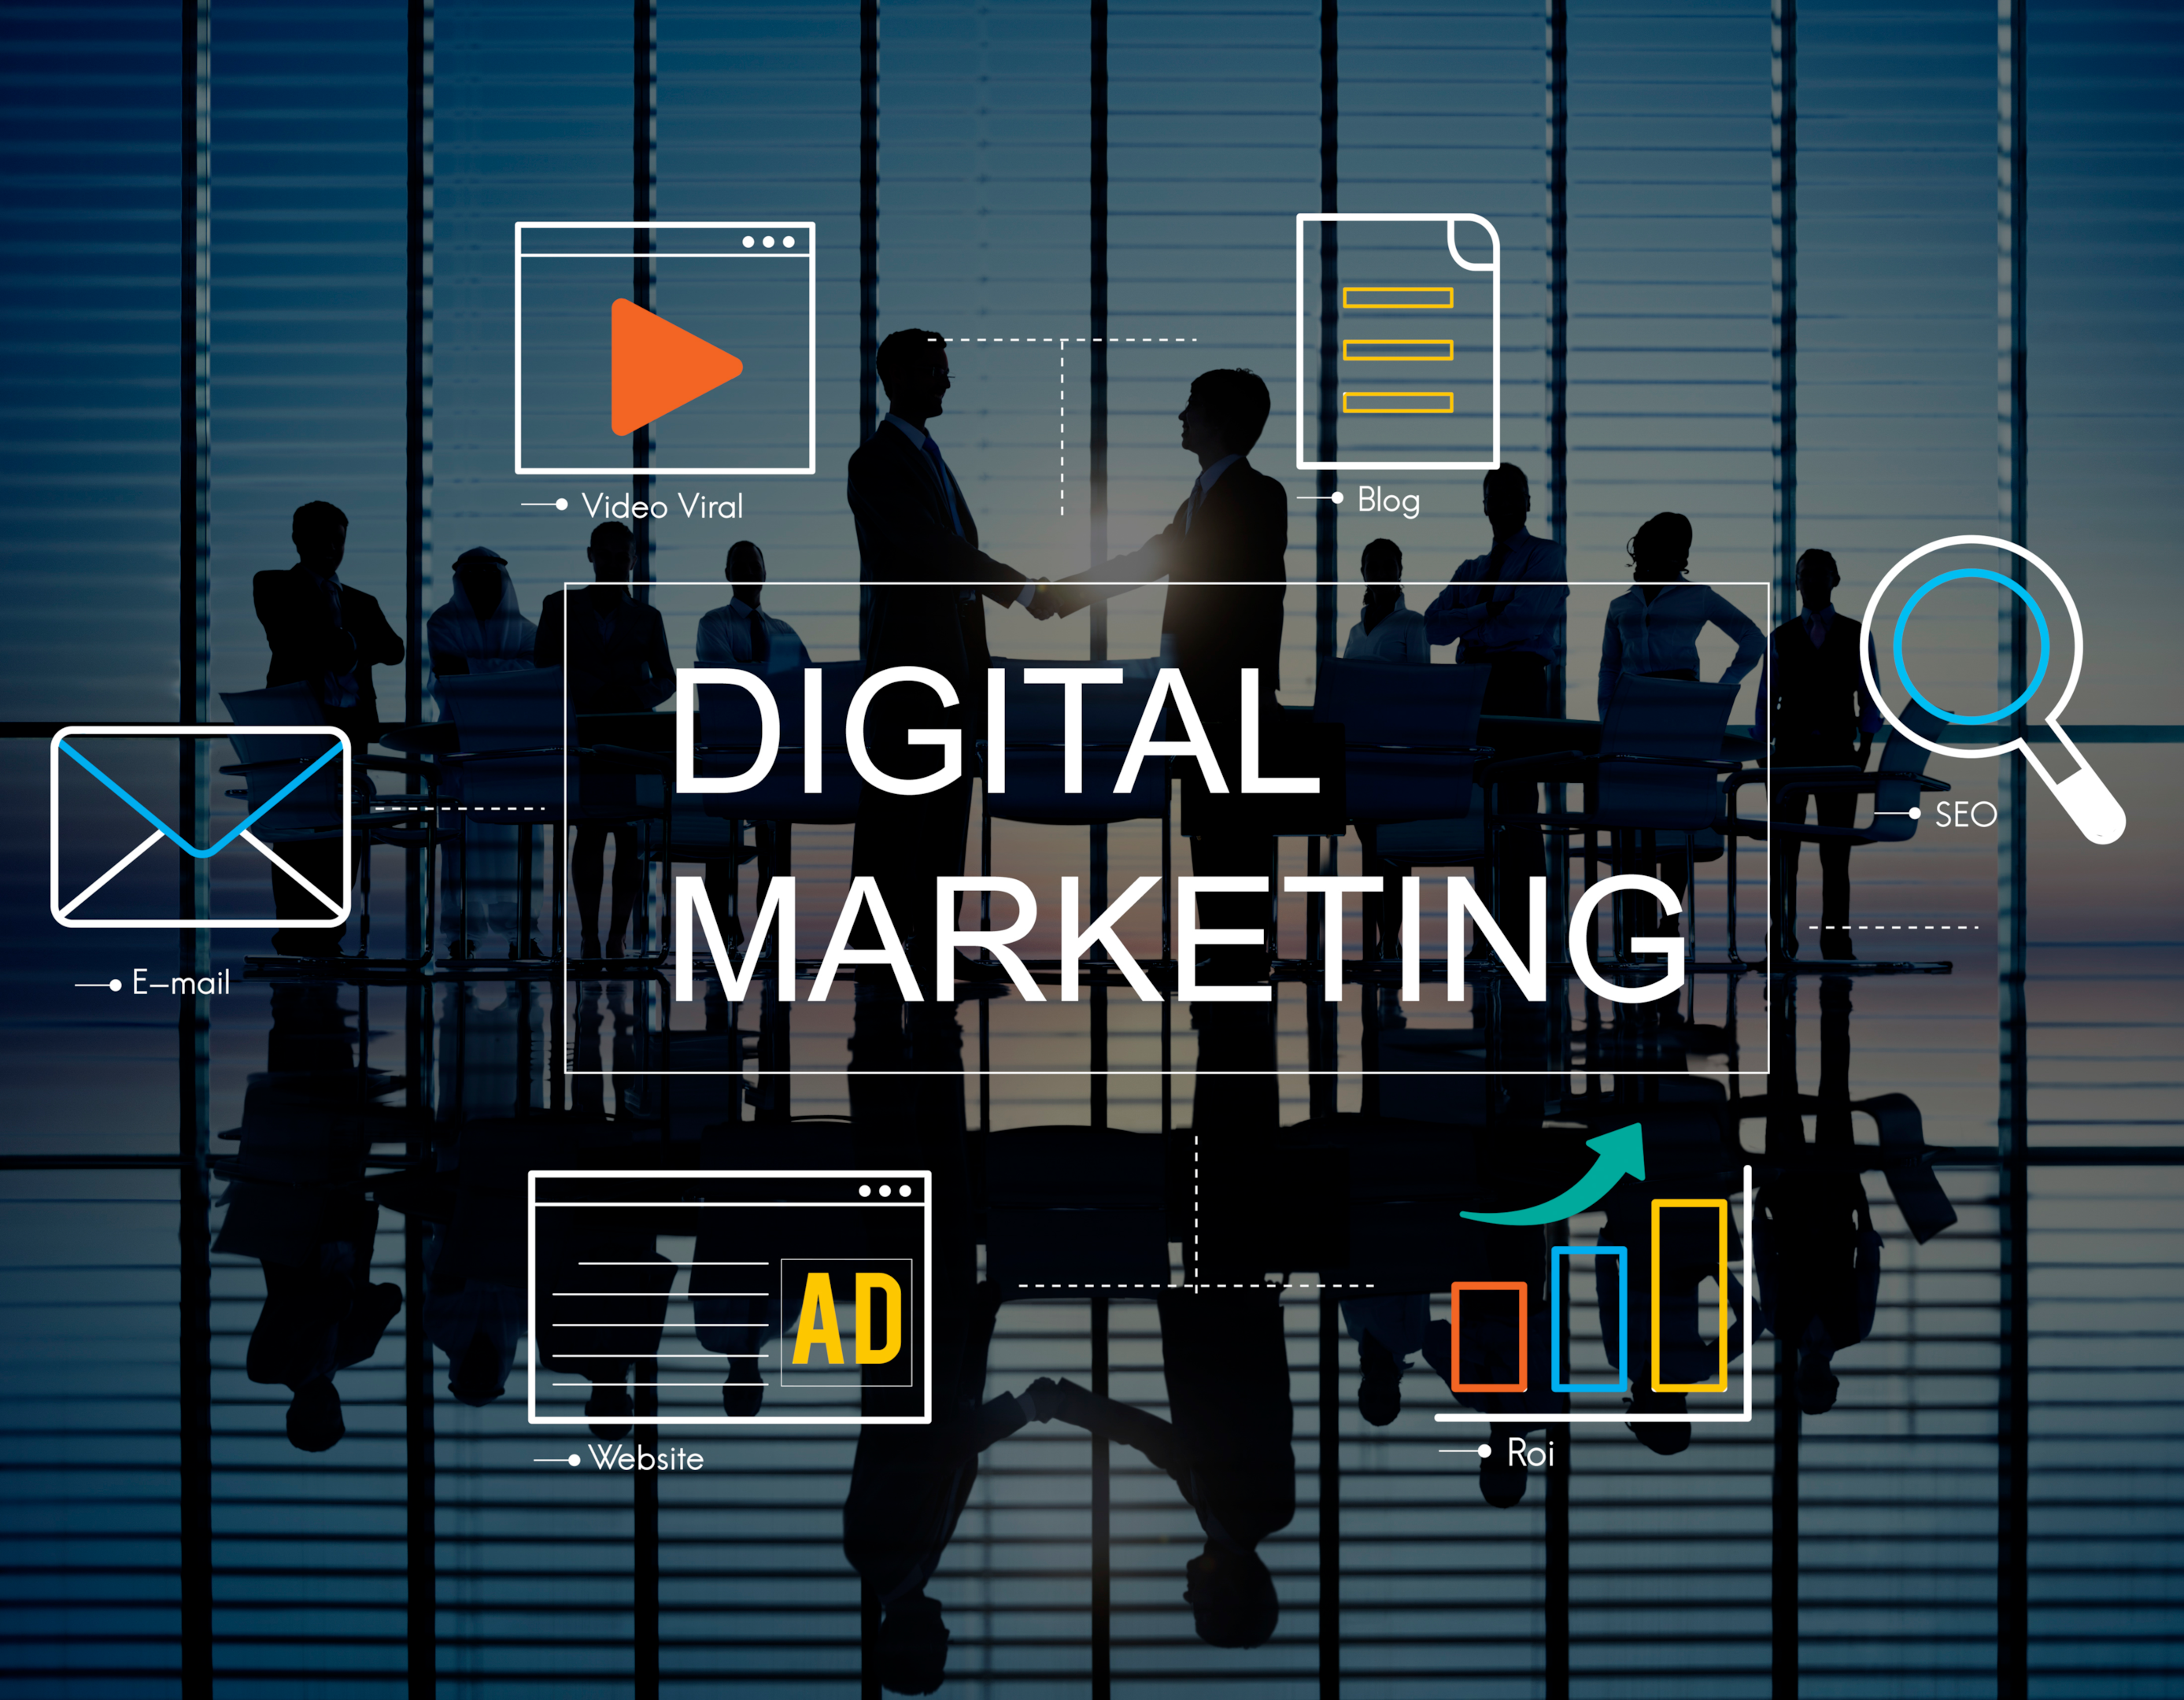 Prompt Adaption of digital marketing trends is key to success